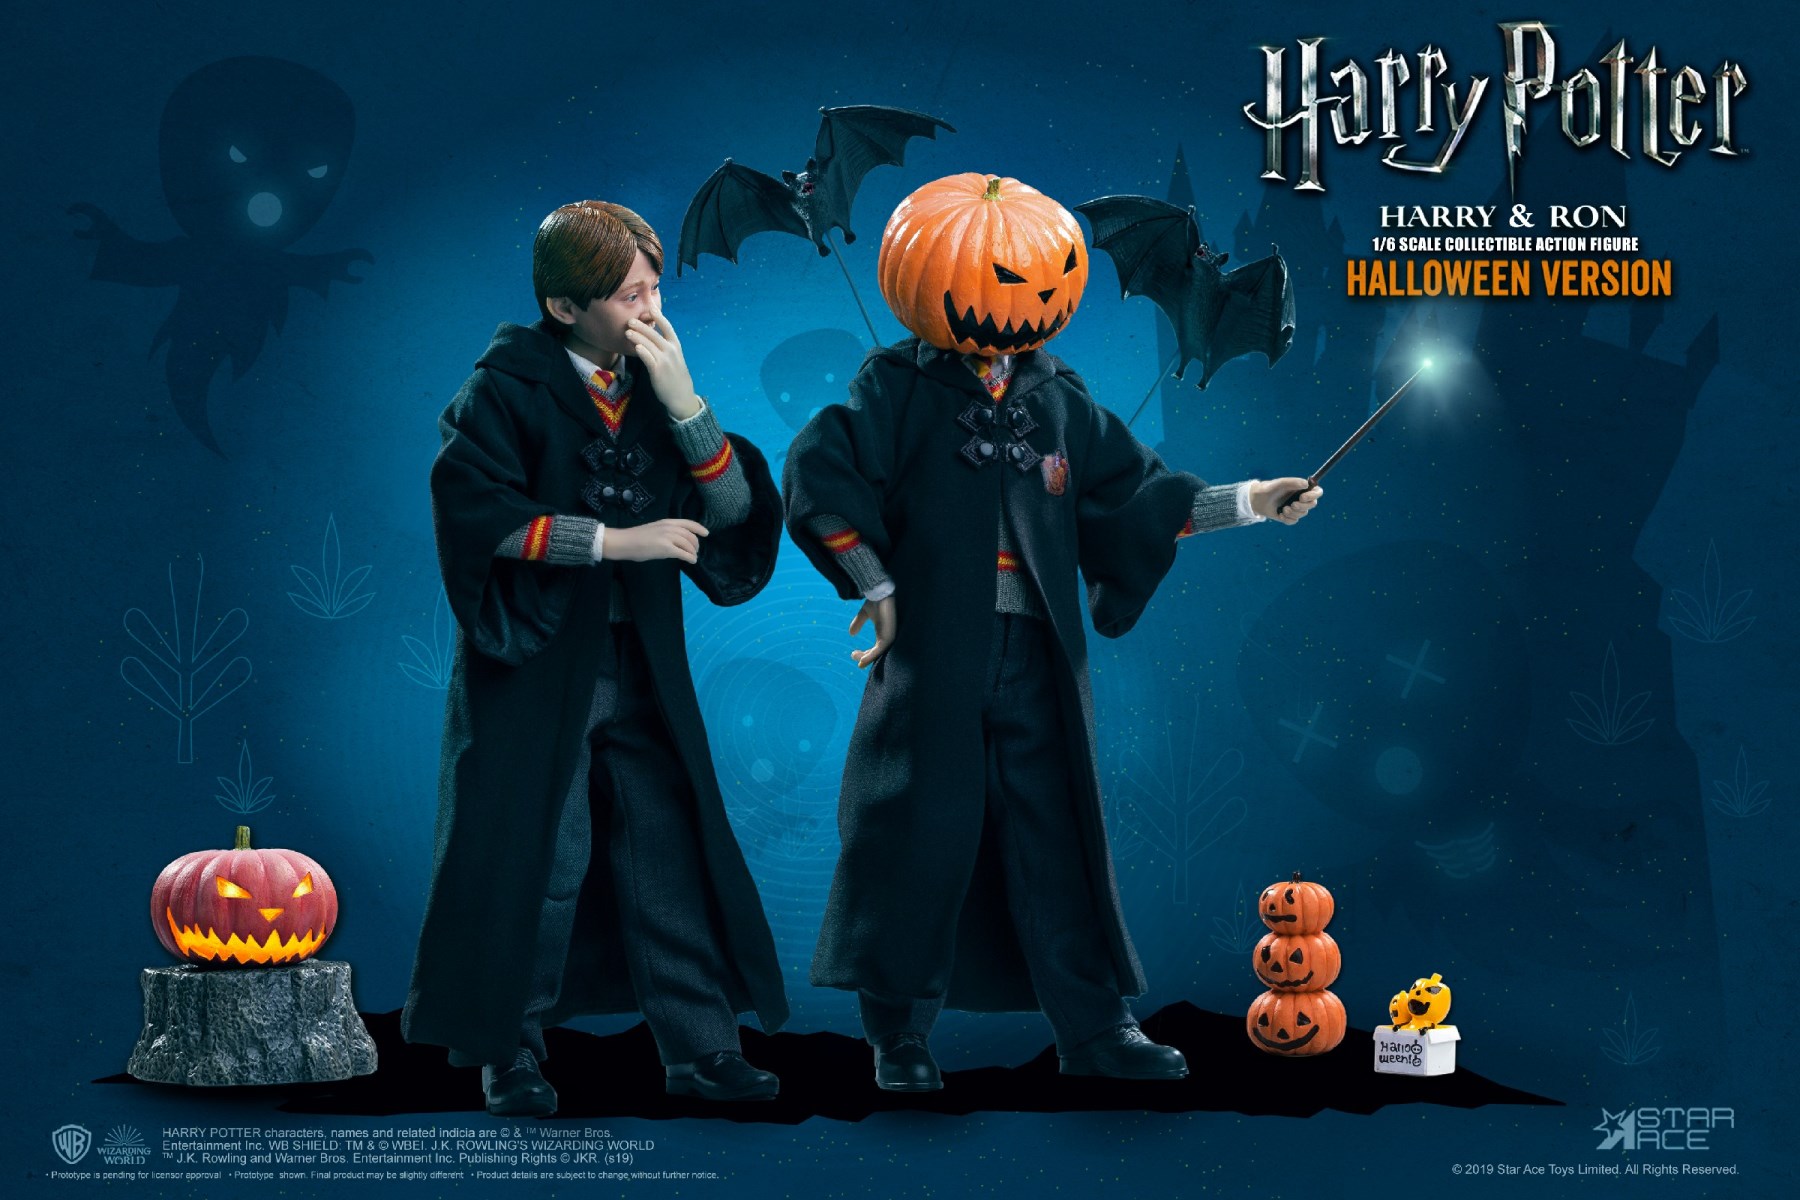 Harry Potter Halloween 1/6 Scale Limited Edition Accessory Pack